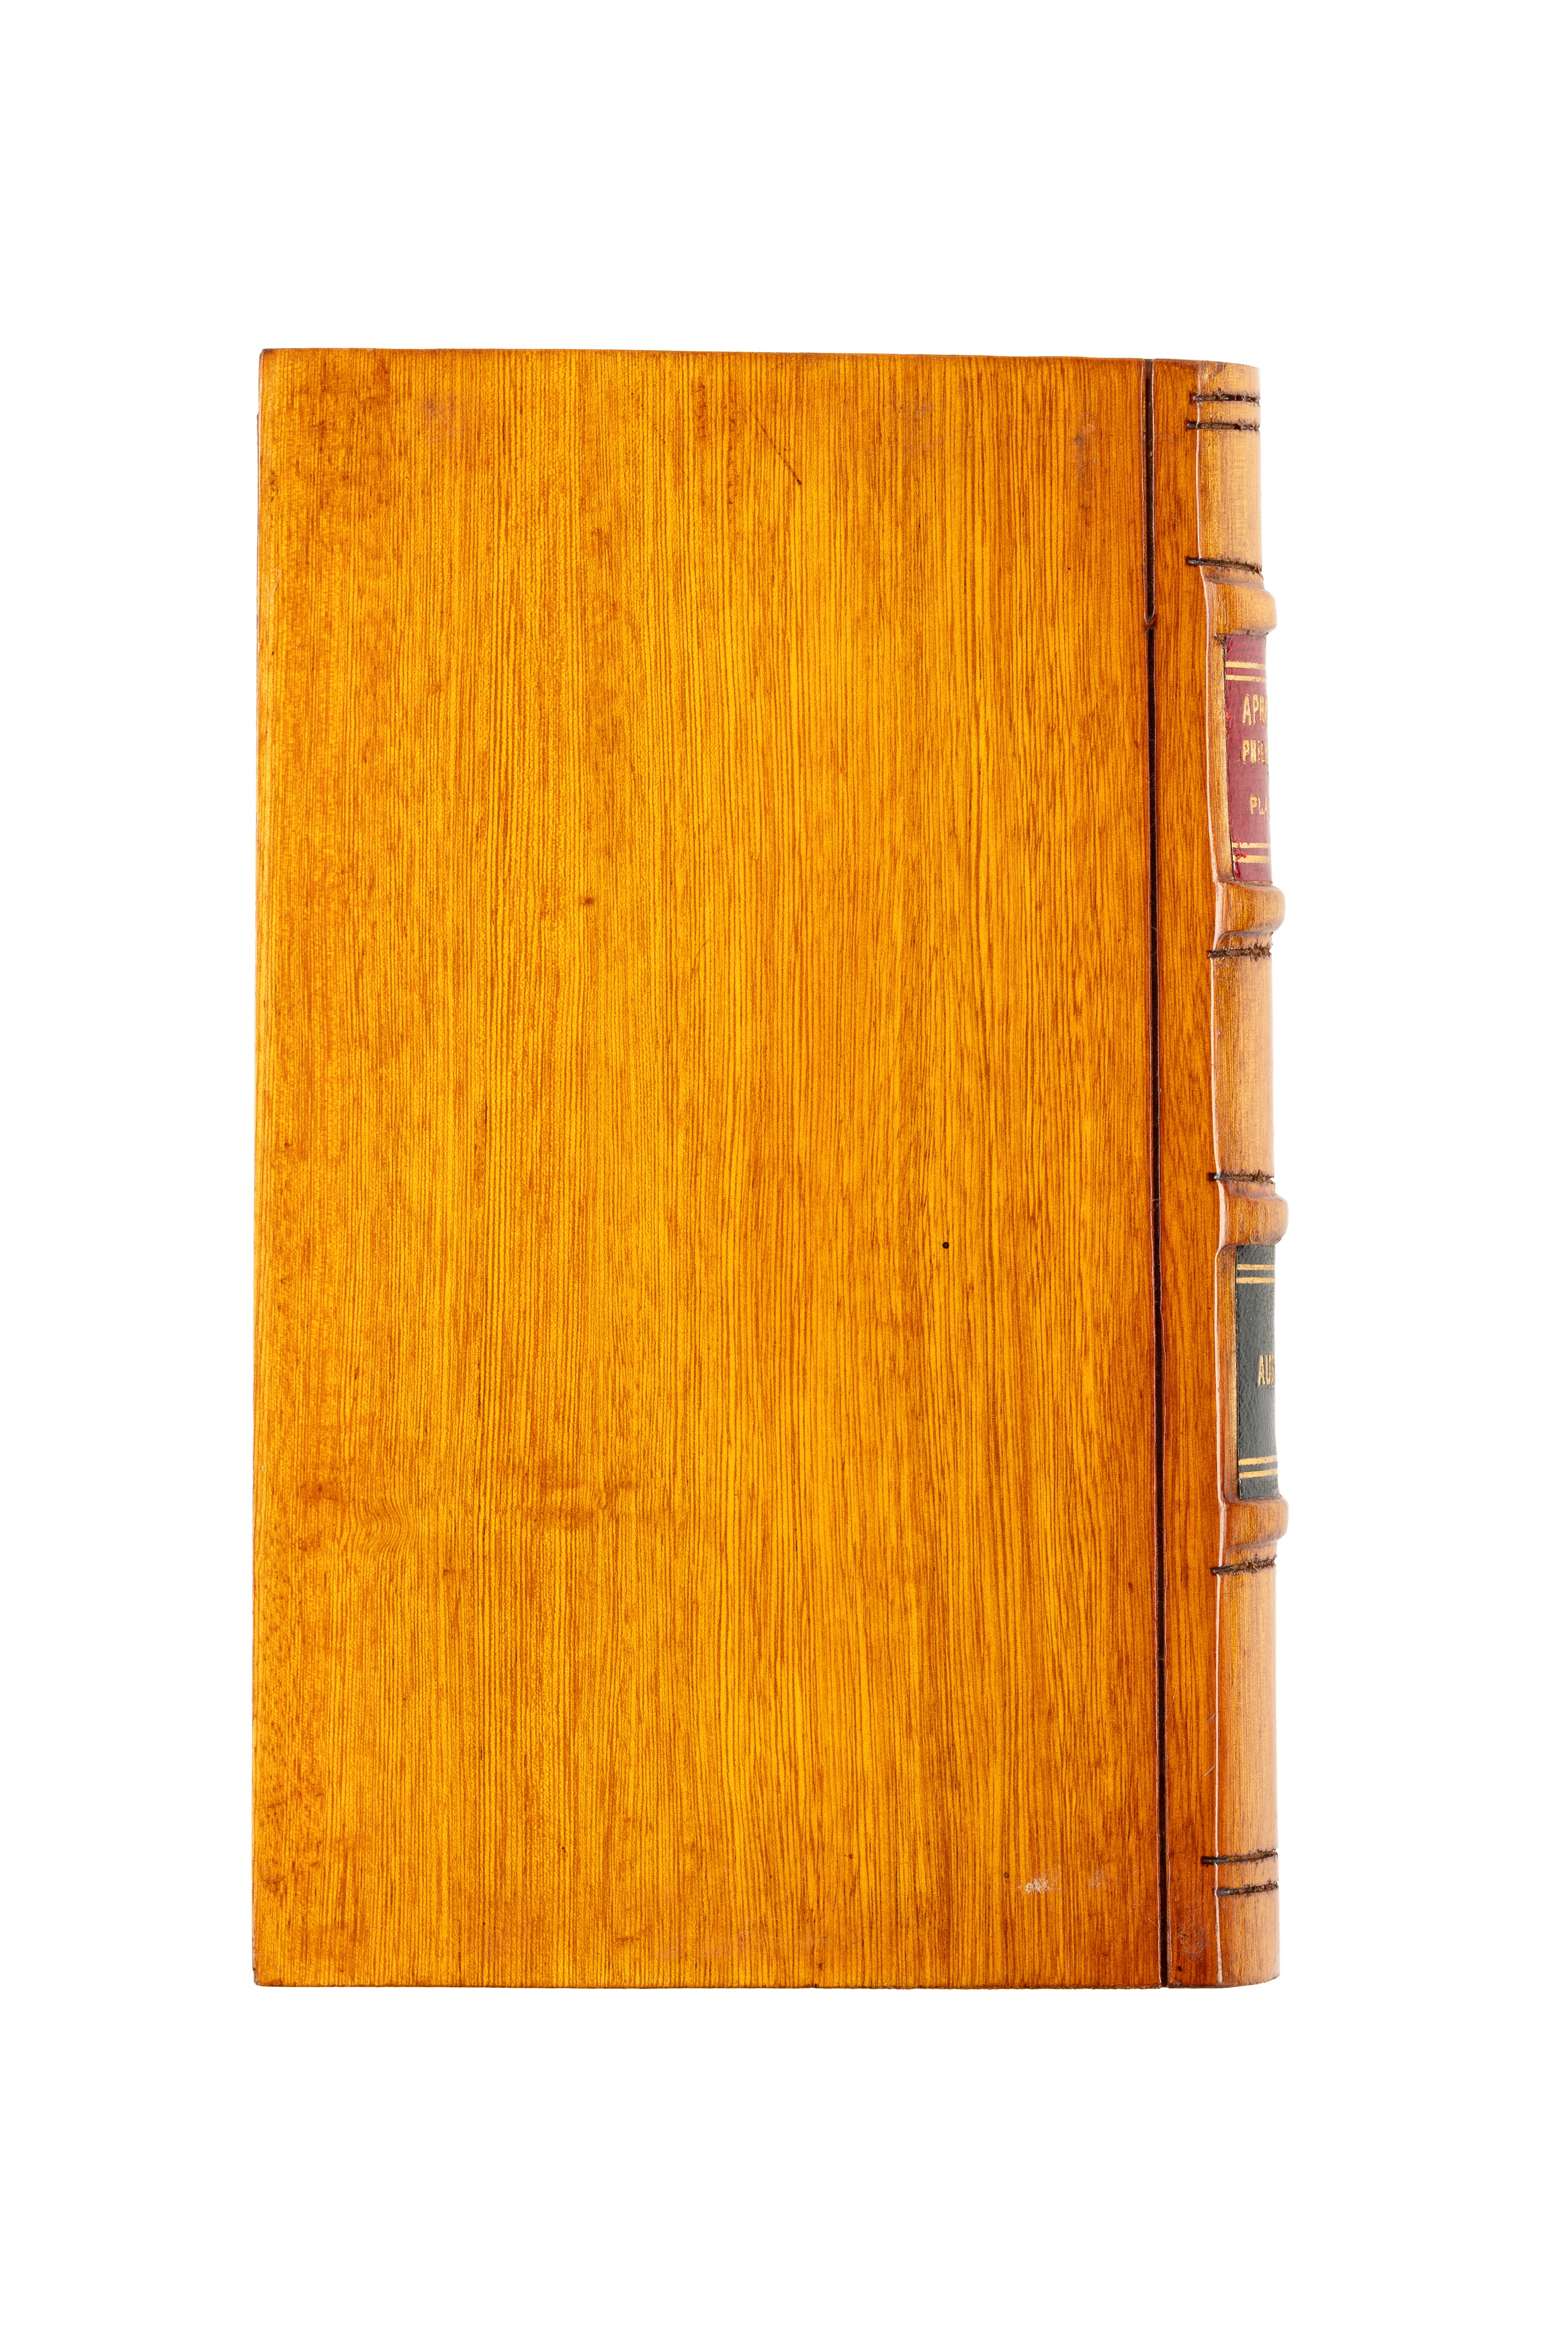 'Aphananthe philippinensis / Native Elm' timber sample in the form of a book